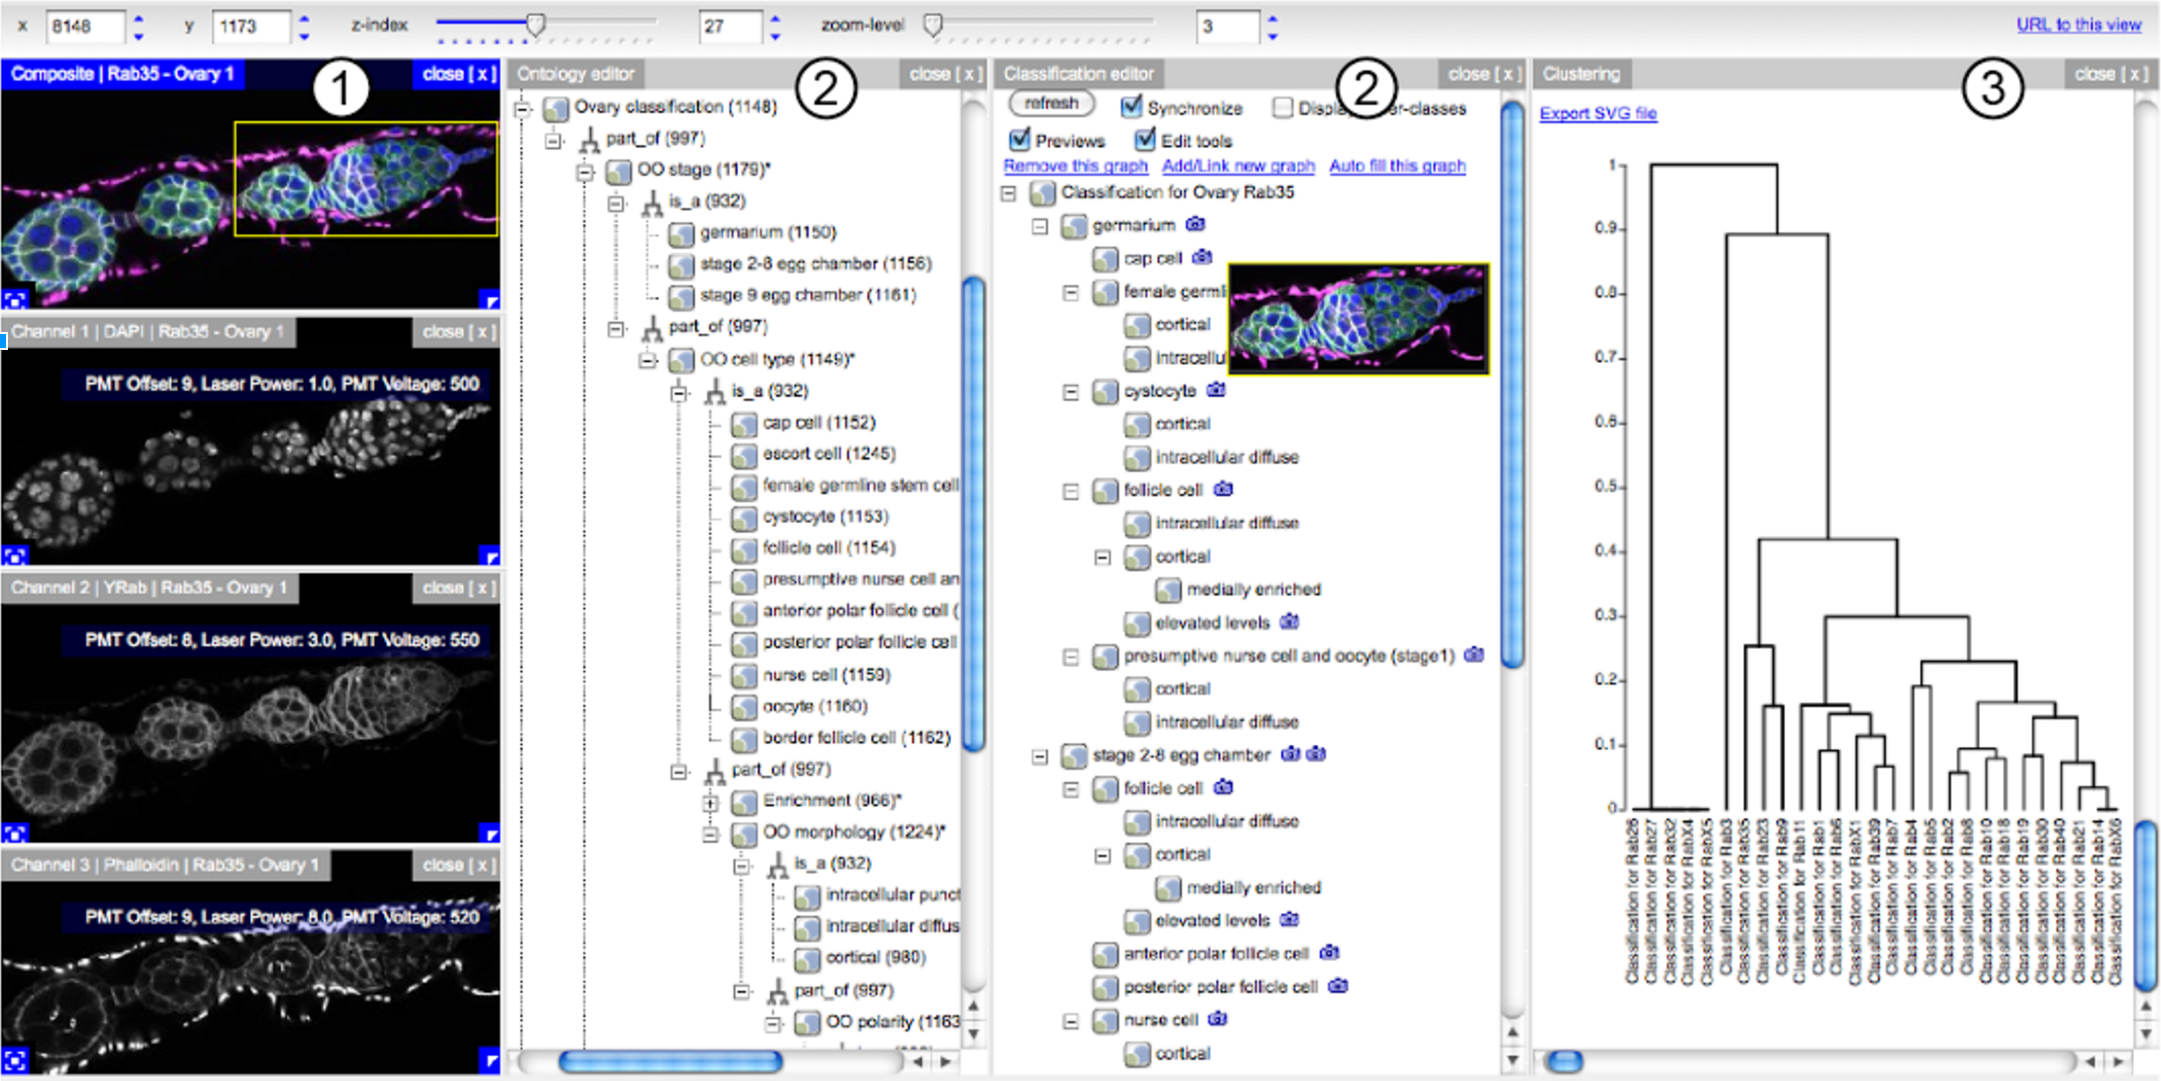 Image of Drosophila light data and different ontology annotation and analysis tools